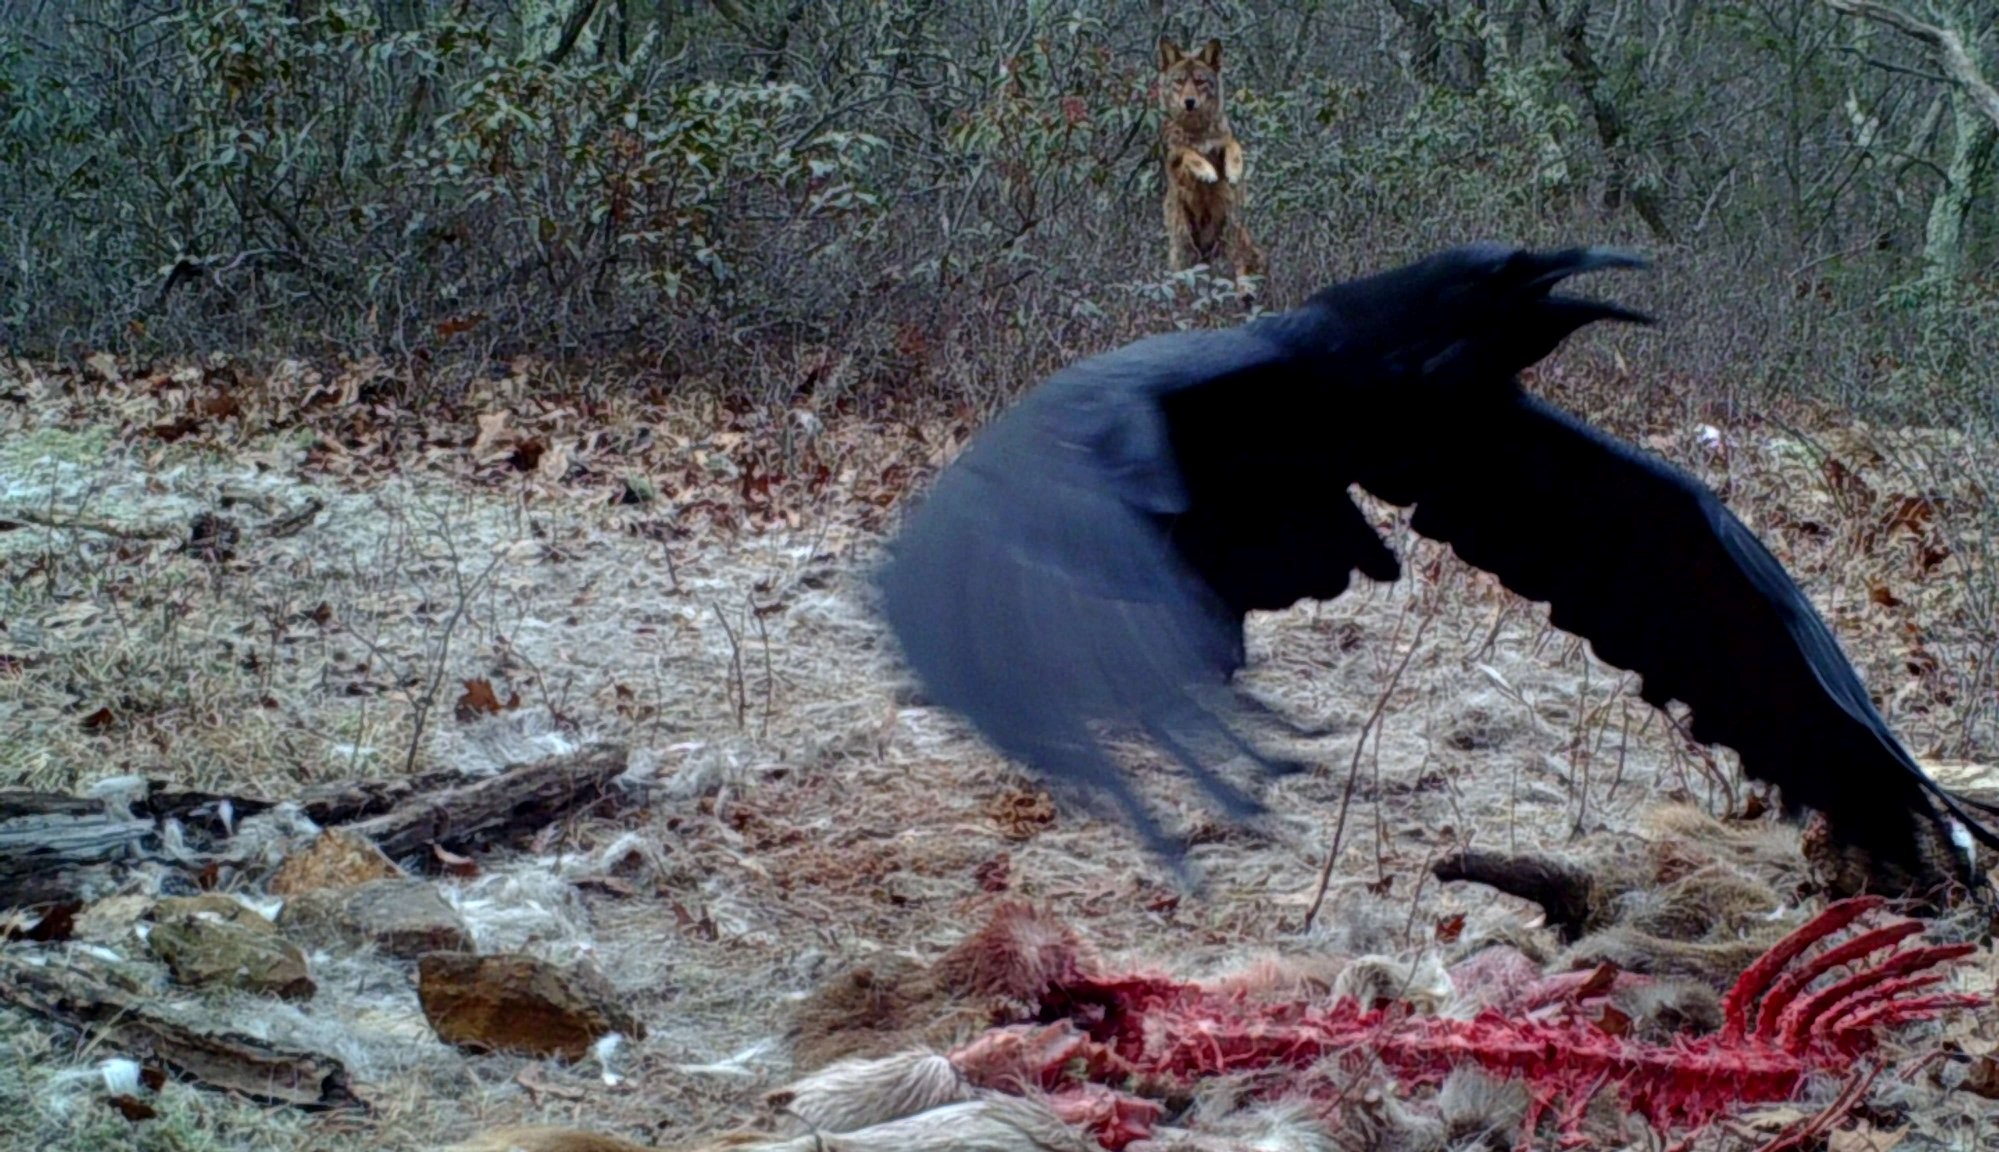 trail cam footage of raven at carcass with coyote in the background